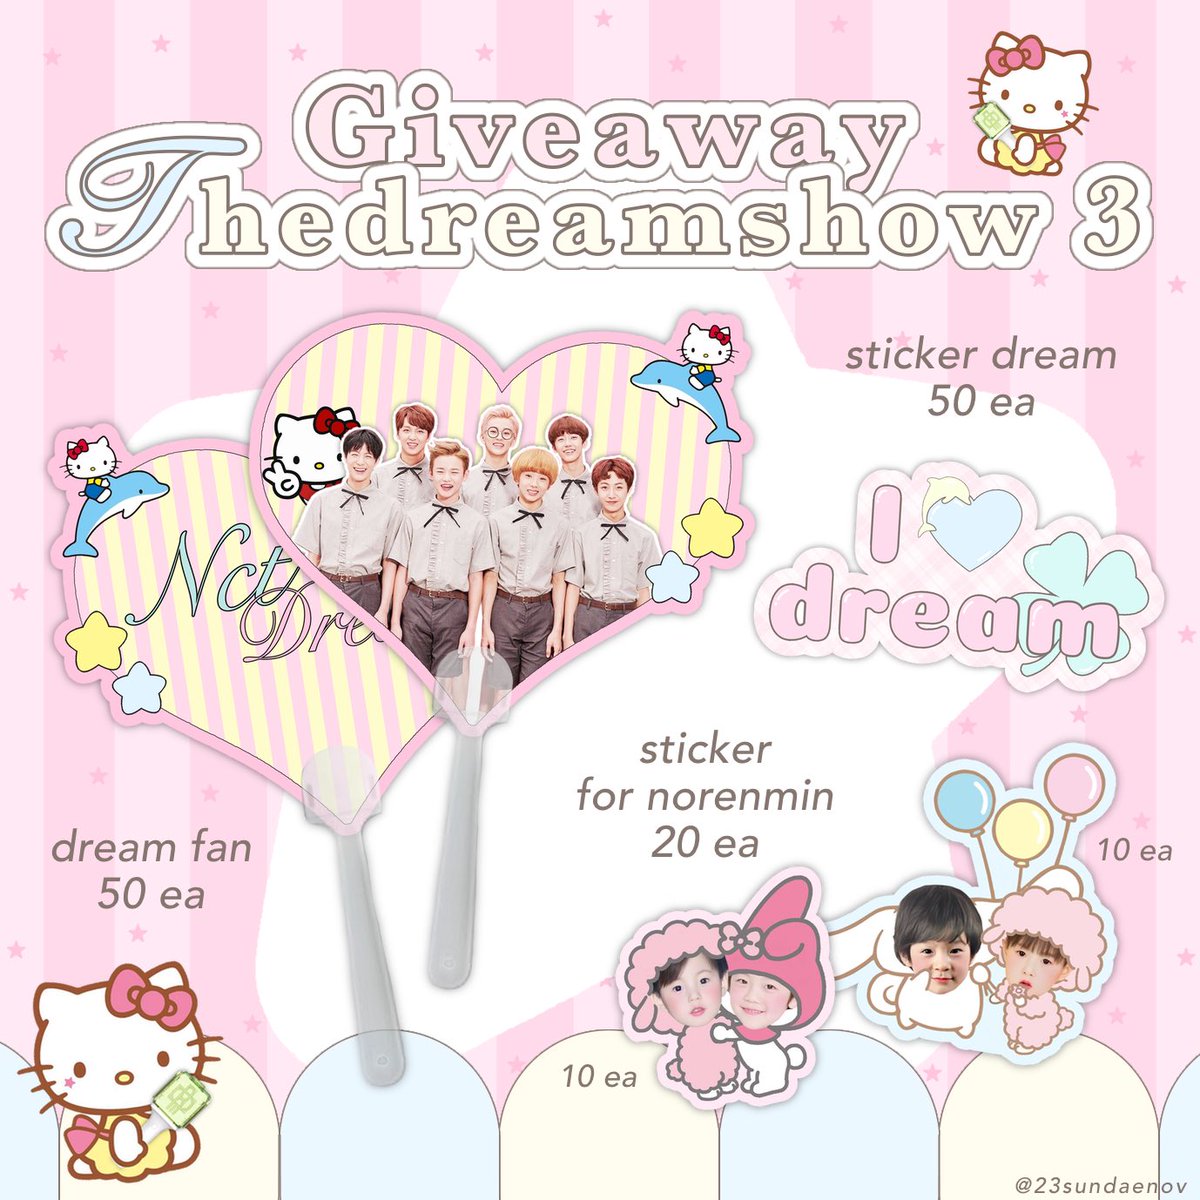 pls rt ♡♡

giveaway THEDREAMSHOW3 ! !

(づ˶•༝•˶)づ only 50 set

📍location : rajamangala stadium
time : tba 🕰

* retweet + show this tweet 

#NCTDREAM_THEDREAMSHOW3inBKK 
#NCTDREAM_THEDREAMSHOW3